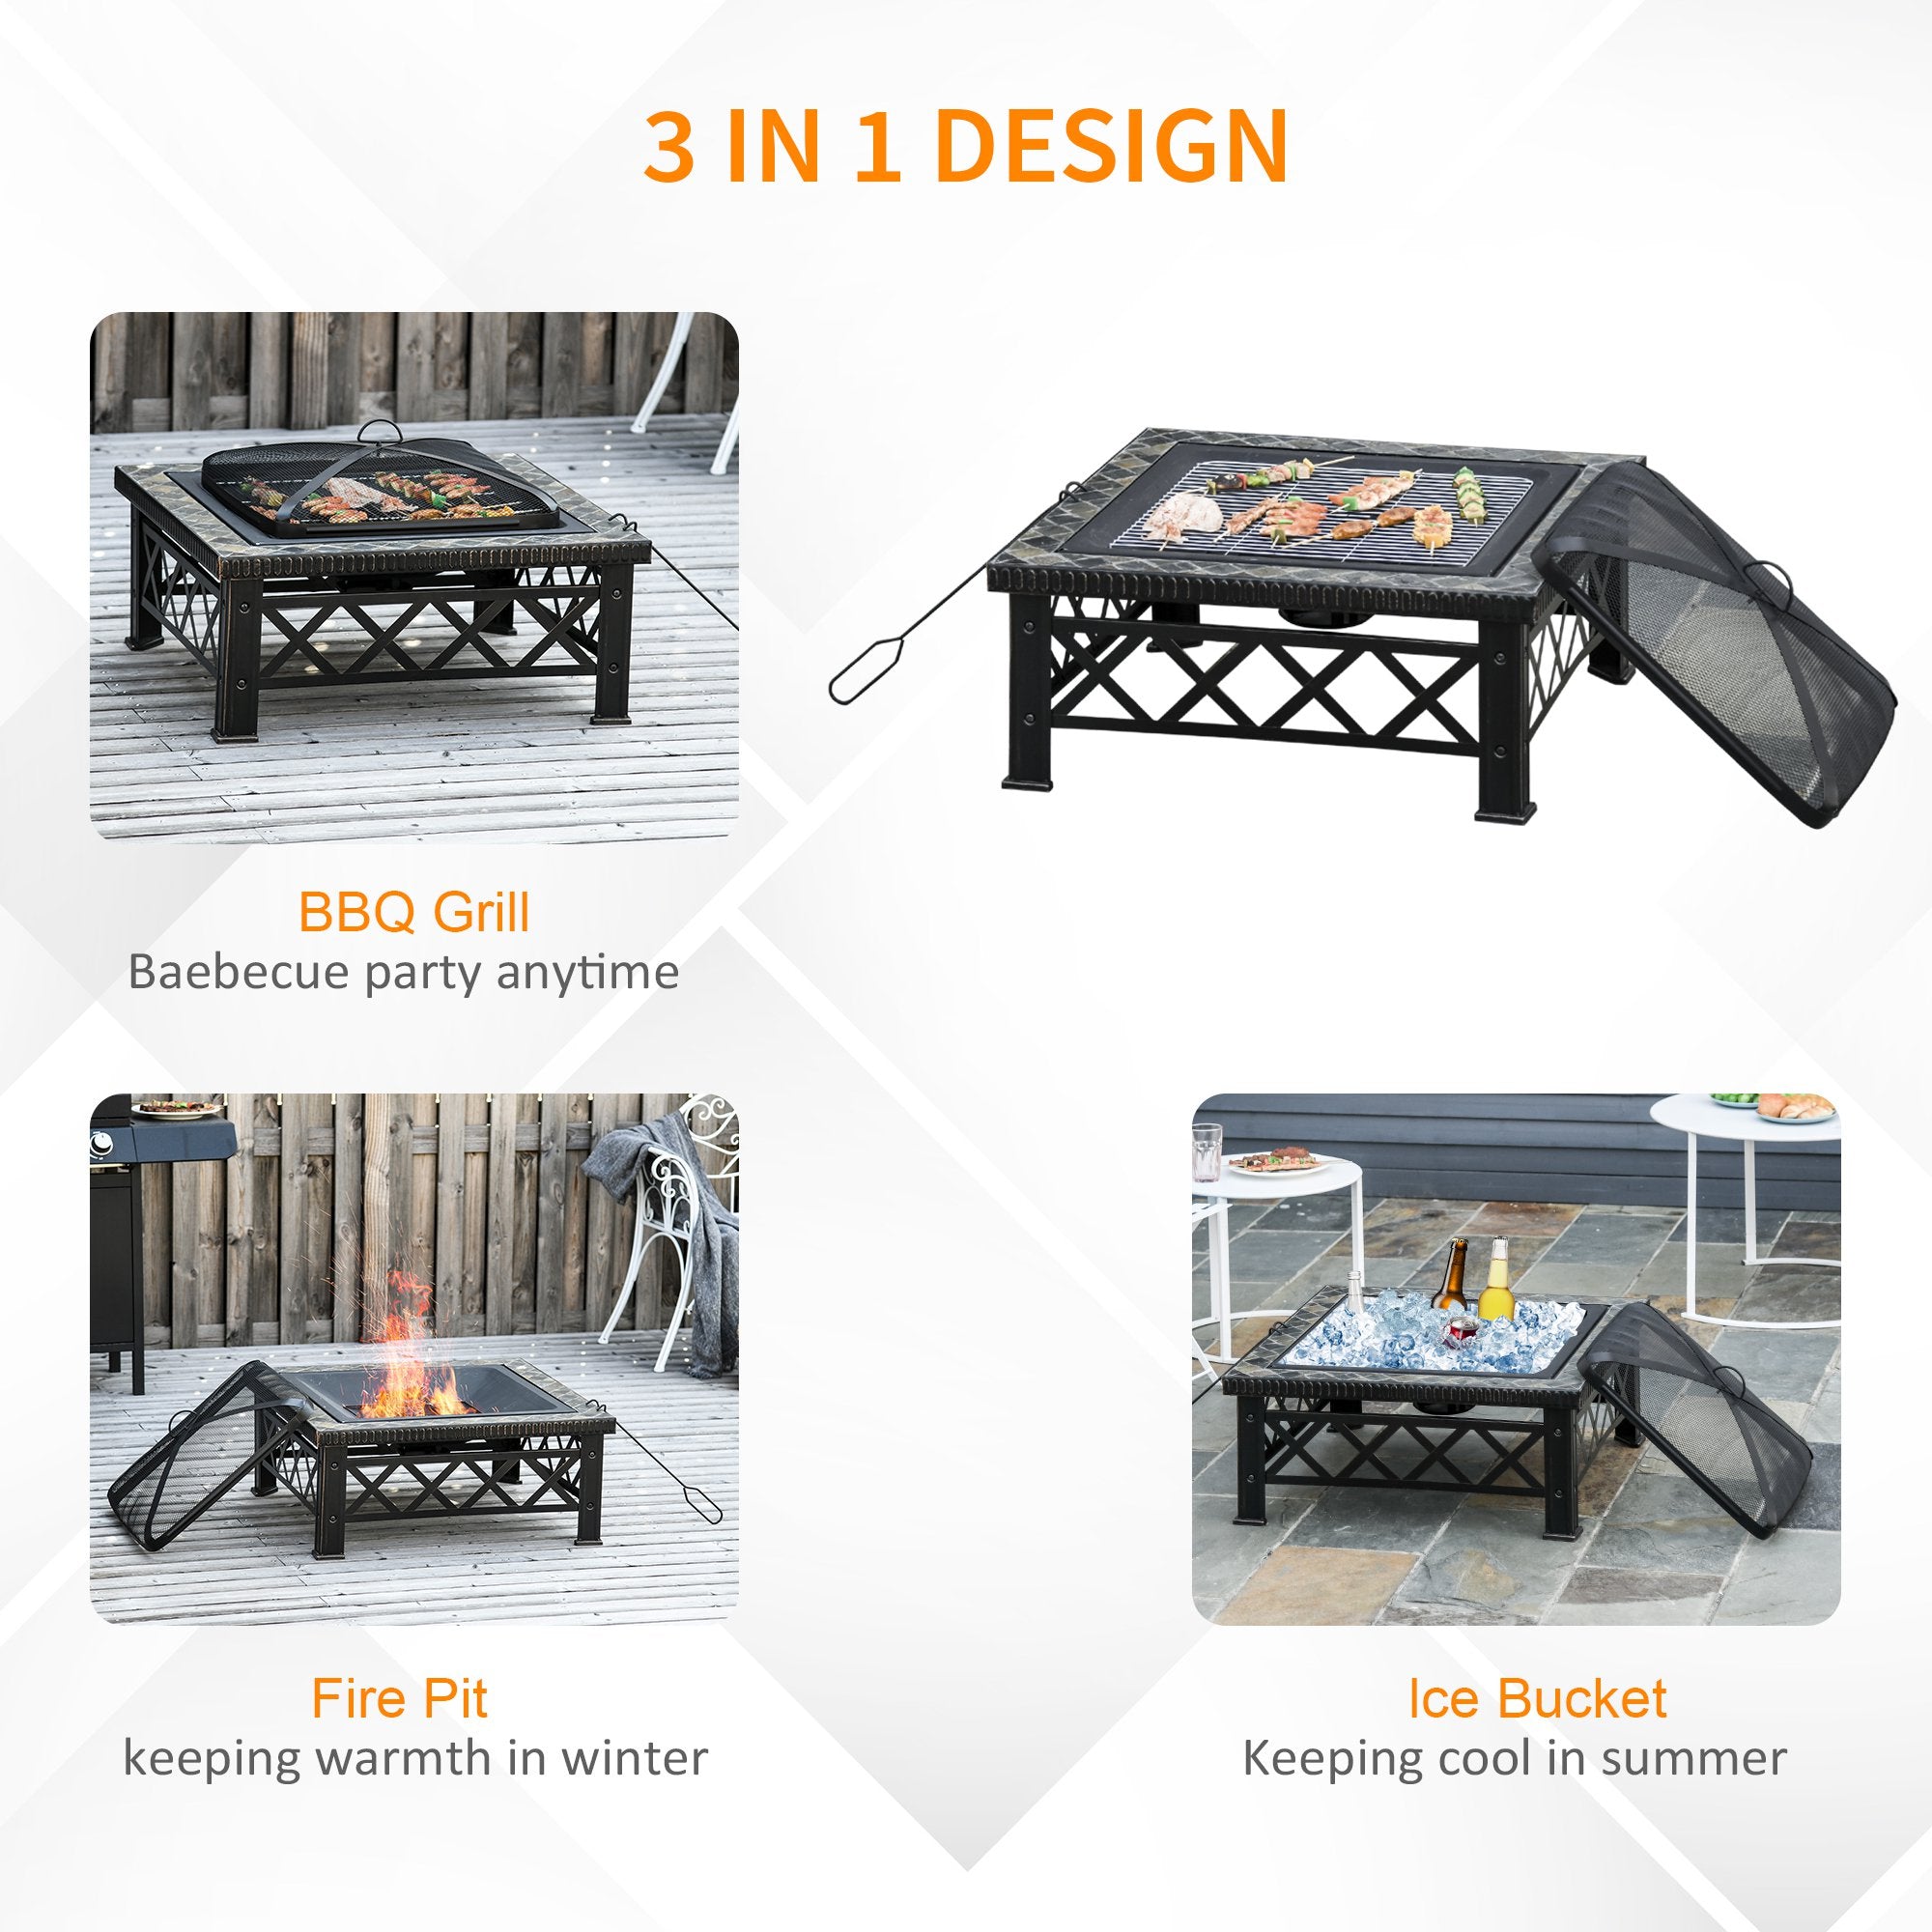 Outsunny 3 in 1 Square Fire Pit Square Table Metal Brazier for Garden, Patio with BBQ Grill Shelf, Spark Screen Cover, Grate, Poker, 76 x 76 x 47cm - Inspirely